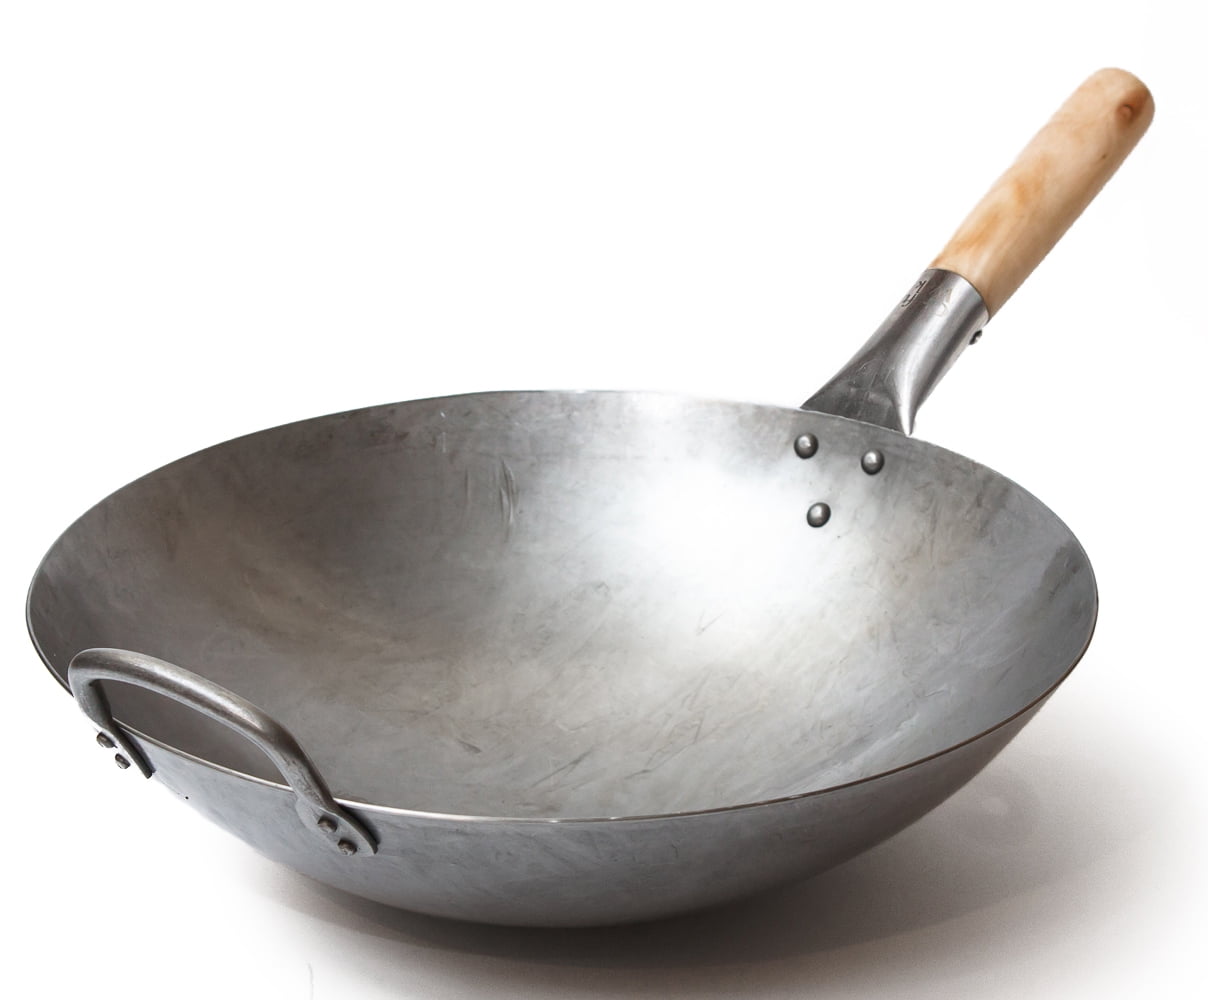 Buy Iron Chinese Wok with Wooden Handle Online at Best Price in